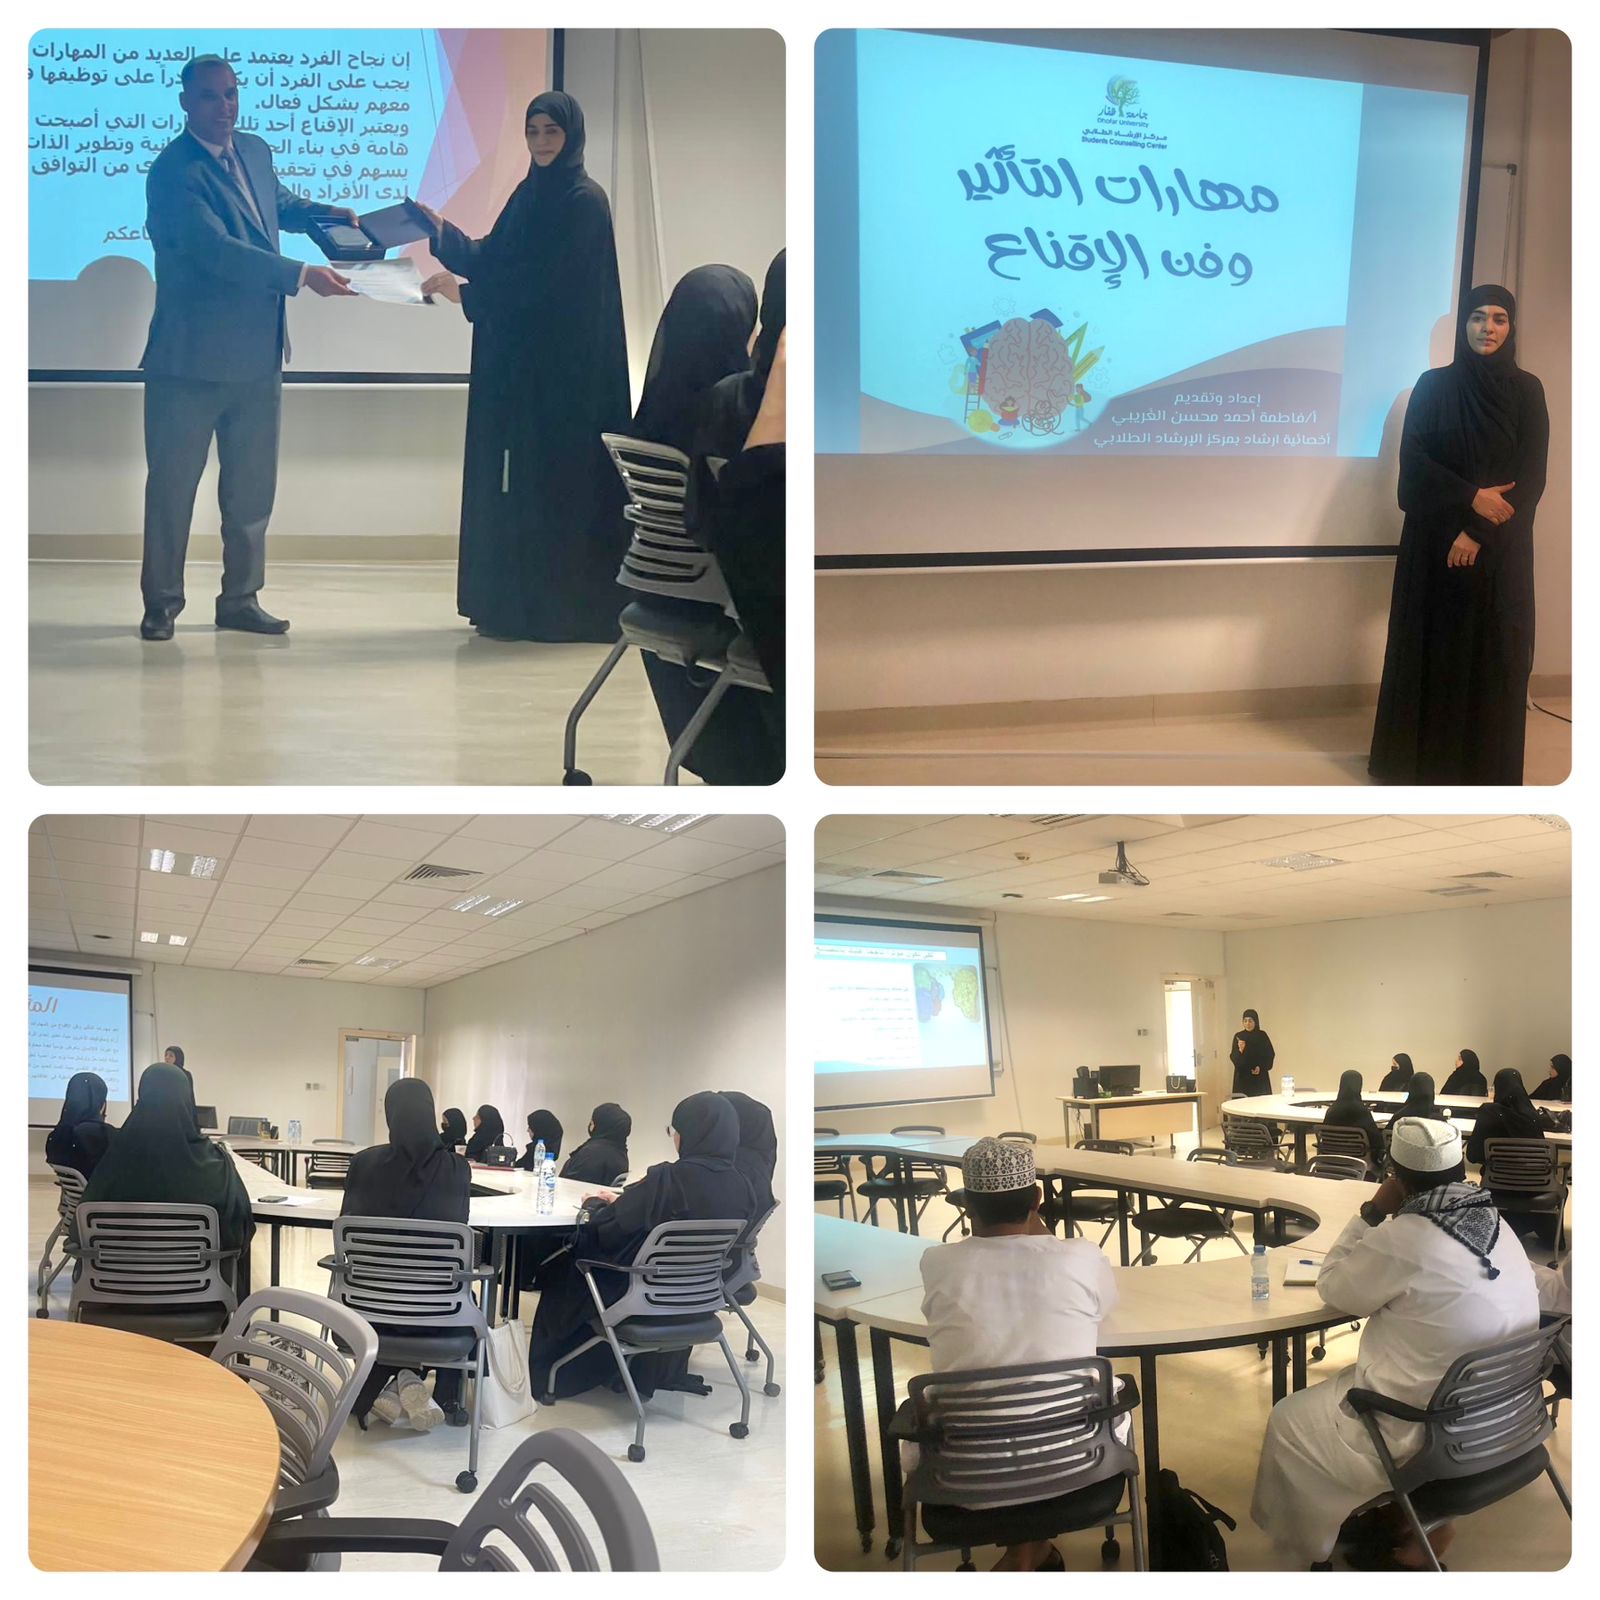 Student counseling Center organized a training program “Influence Skills and the Art of Persuasion” for Dhofar University students